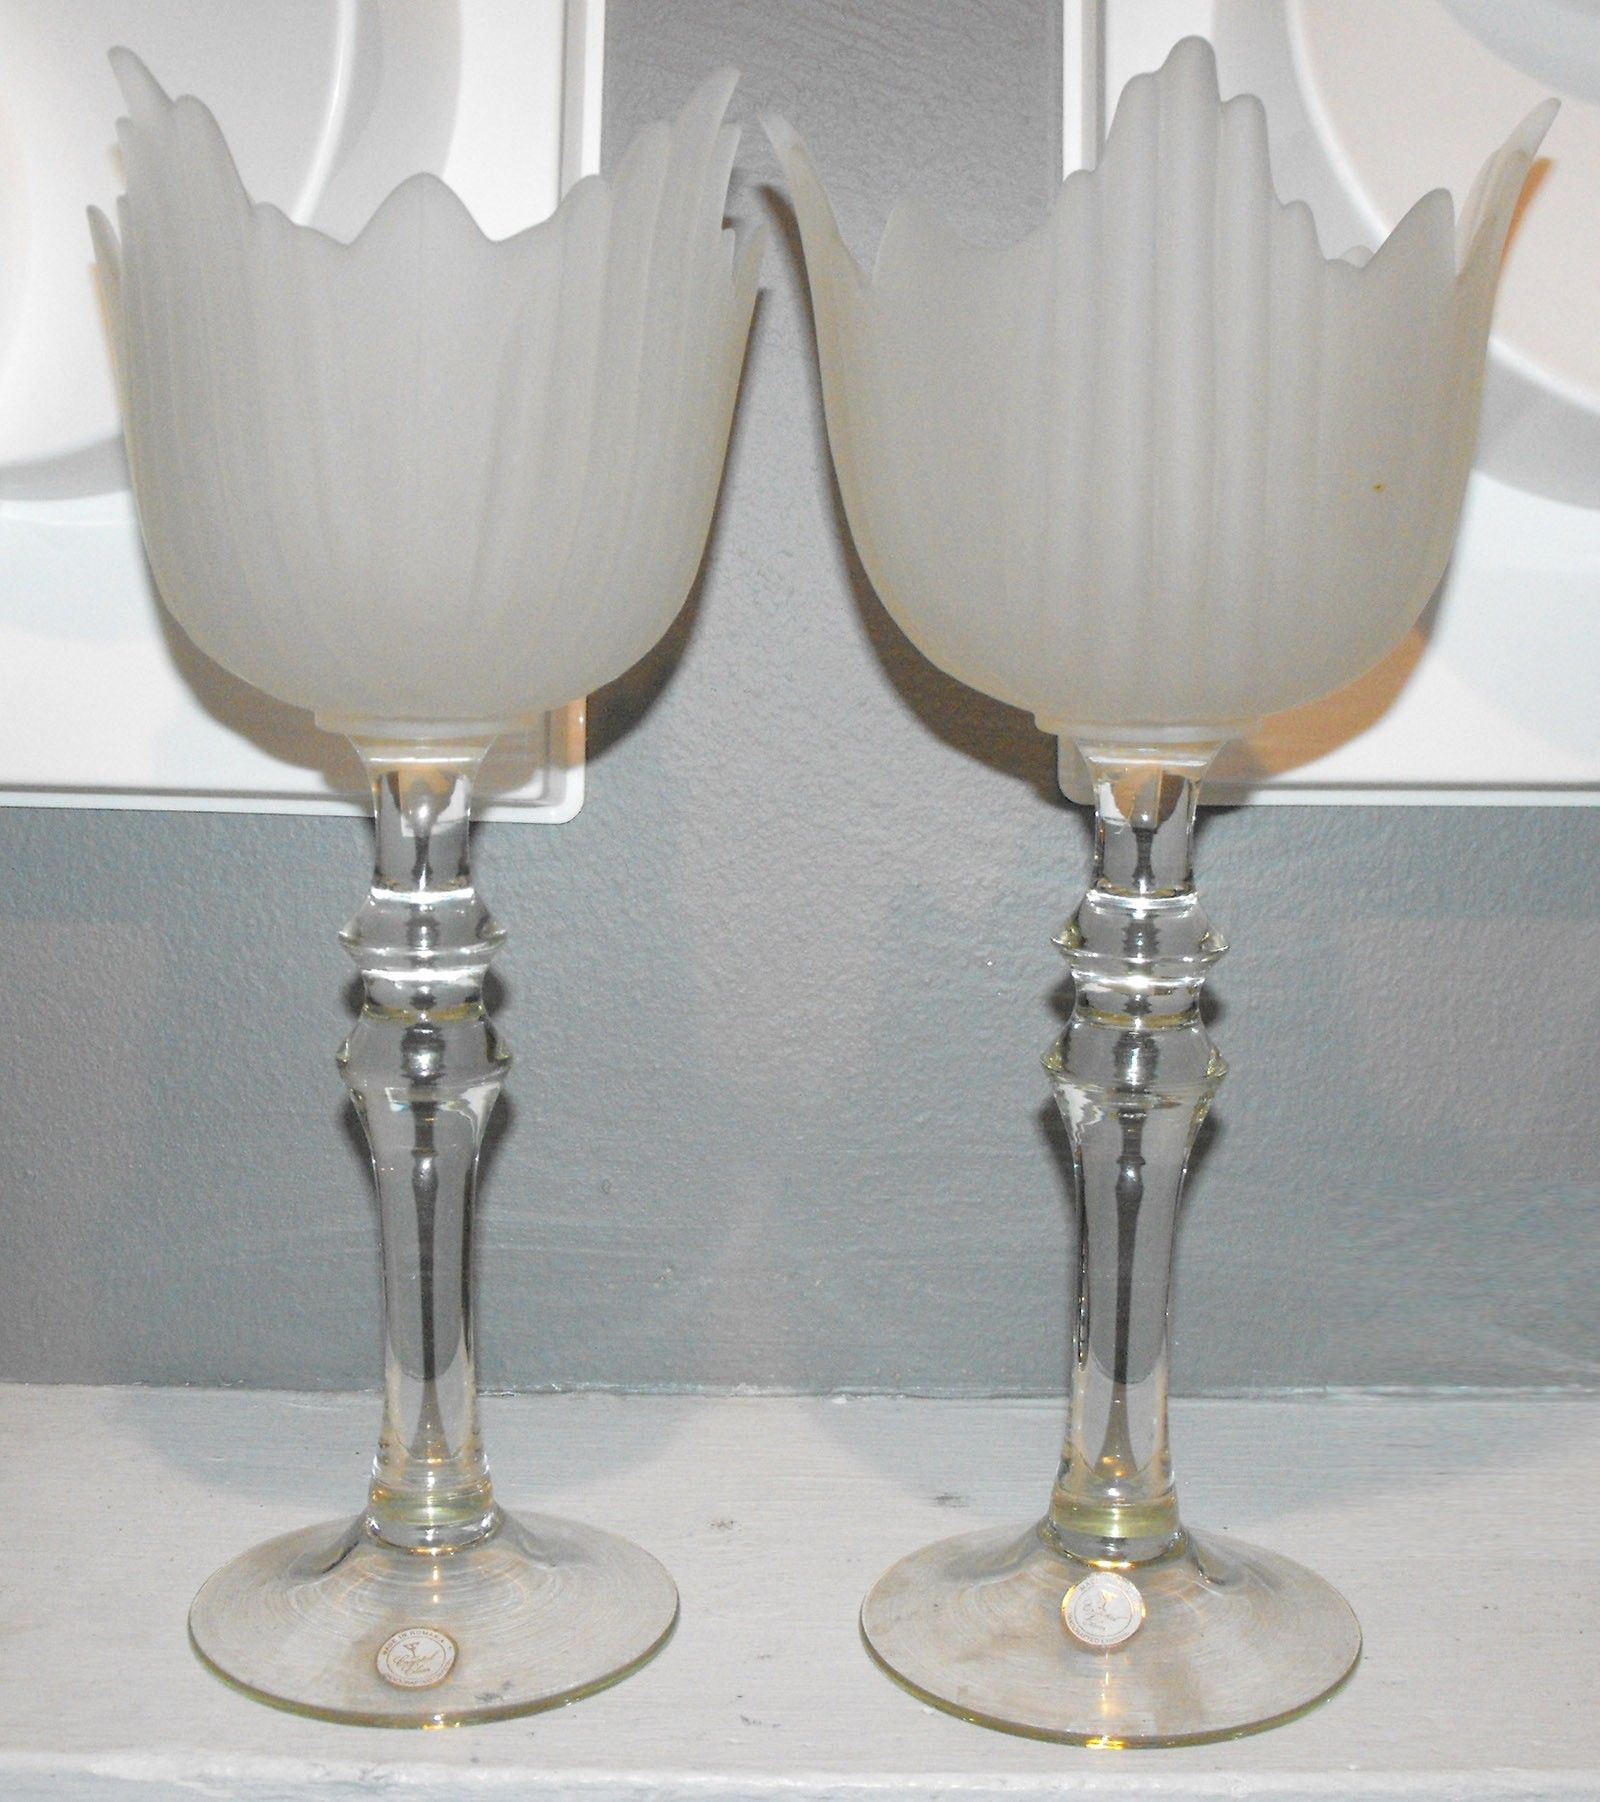 2 Vintage Crystal Frosted Tulips Clear Stem Vases/ Candle Holders made in Romania